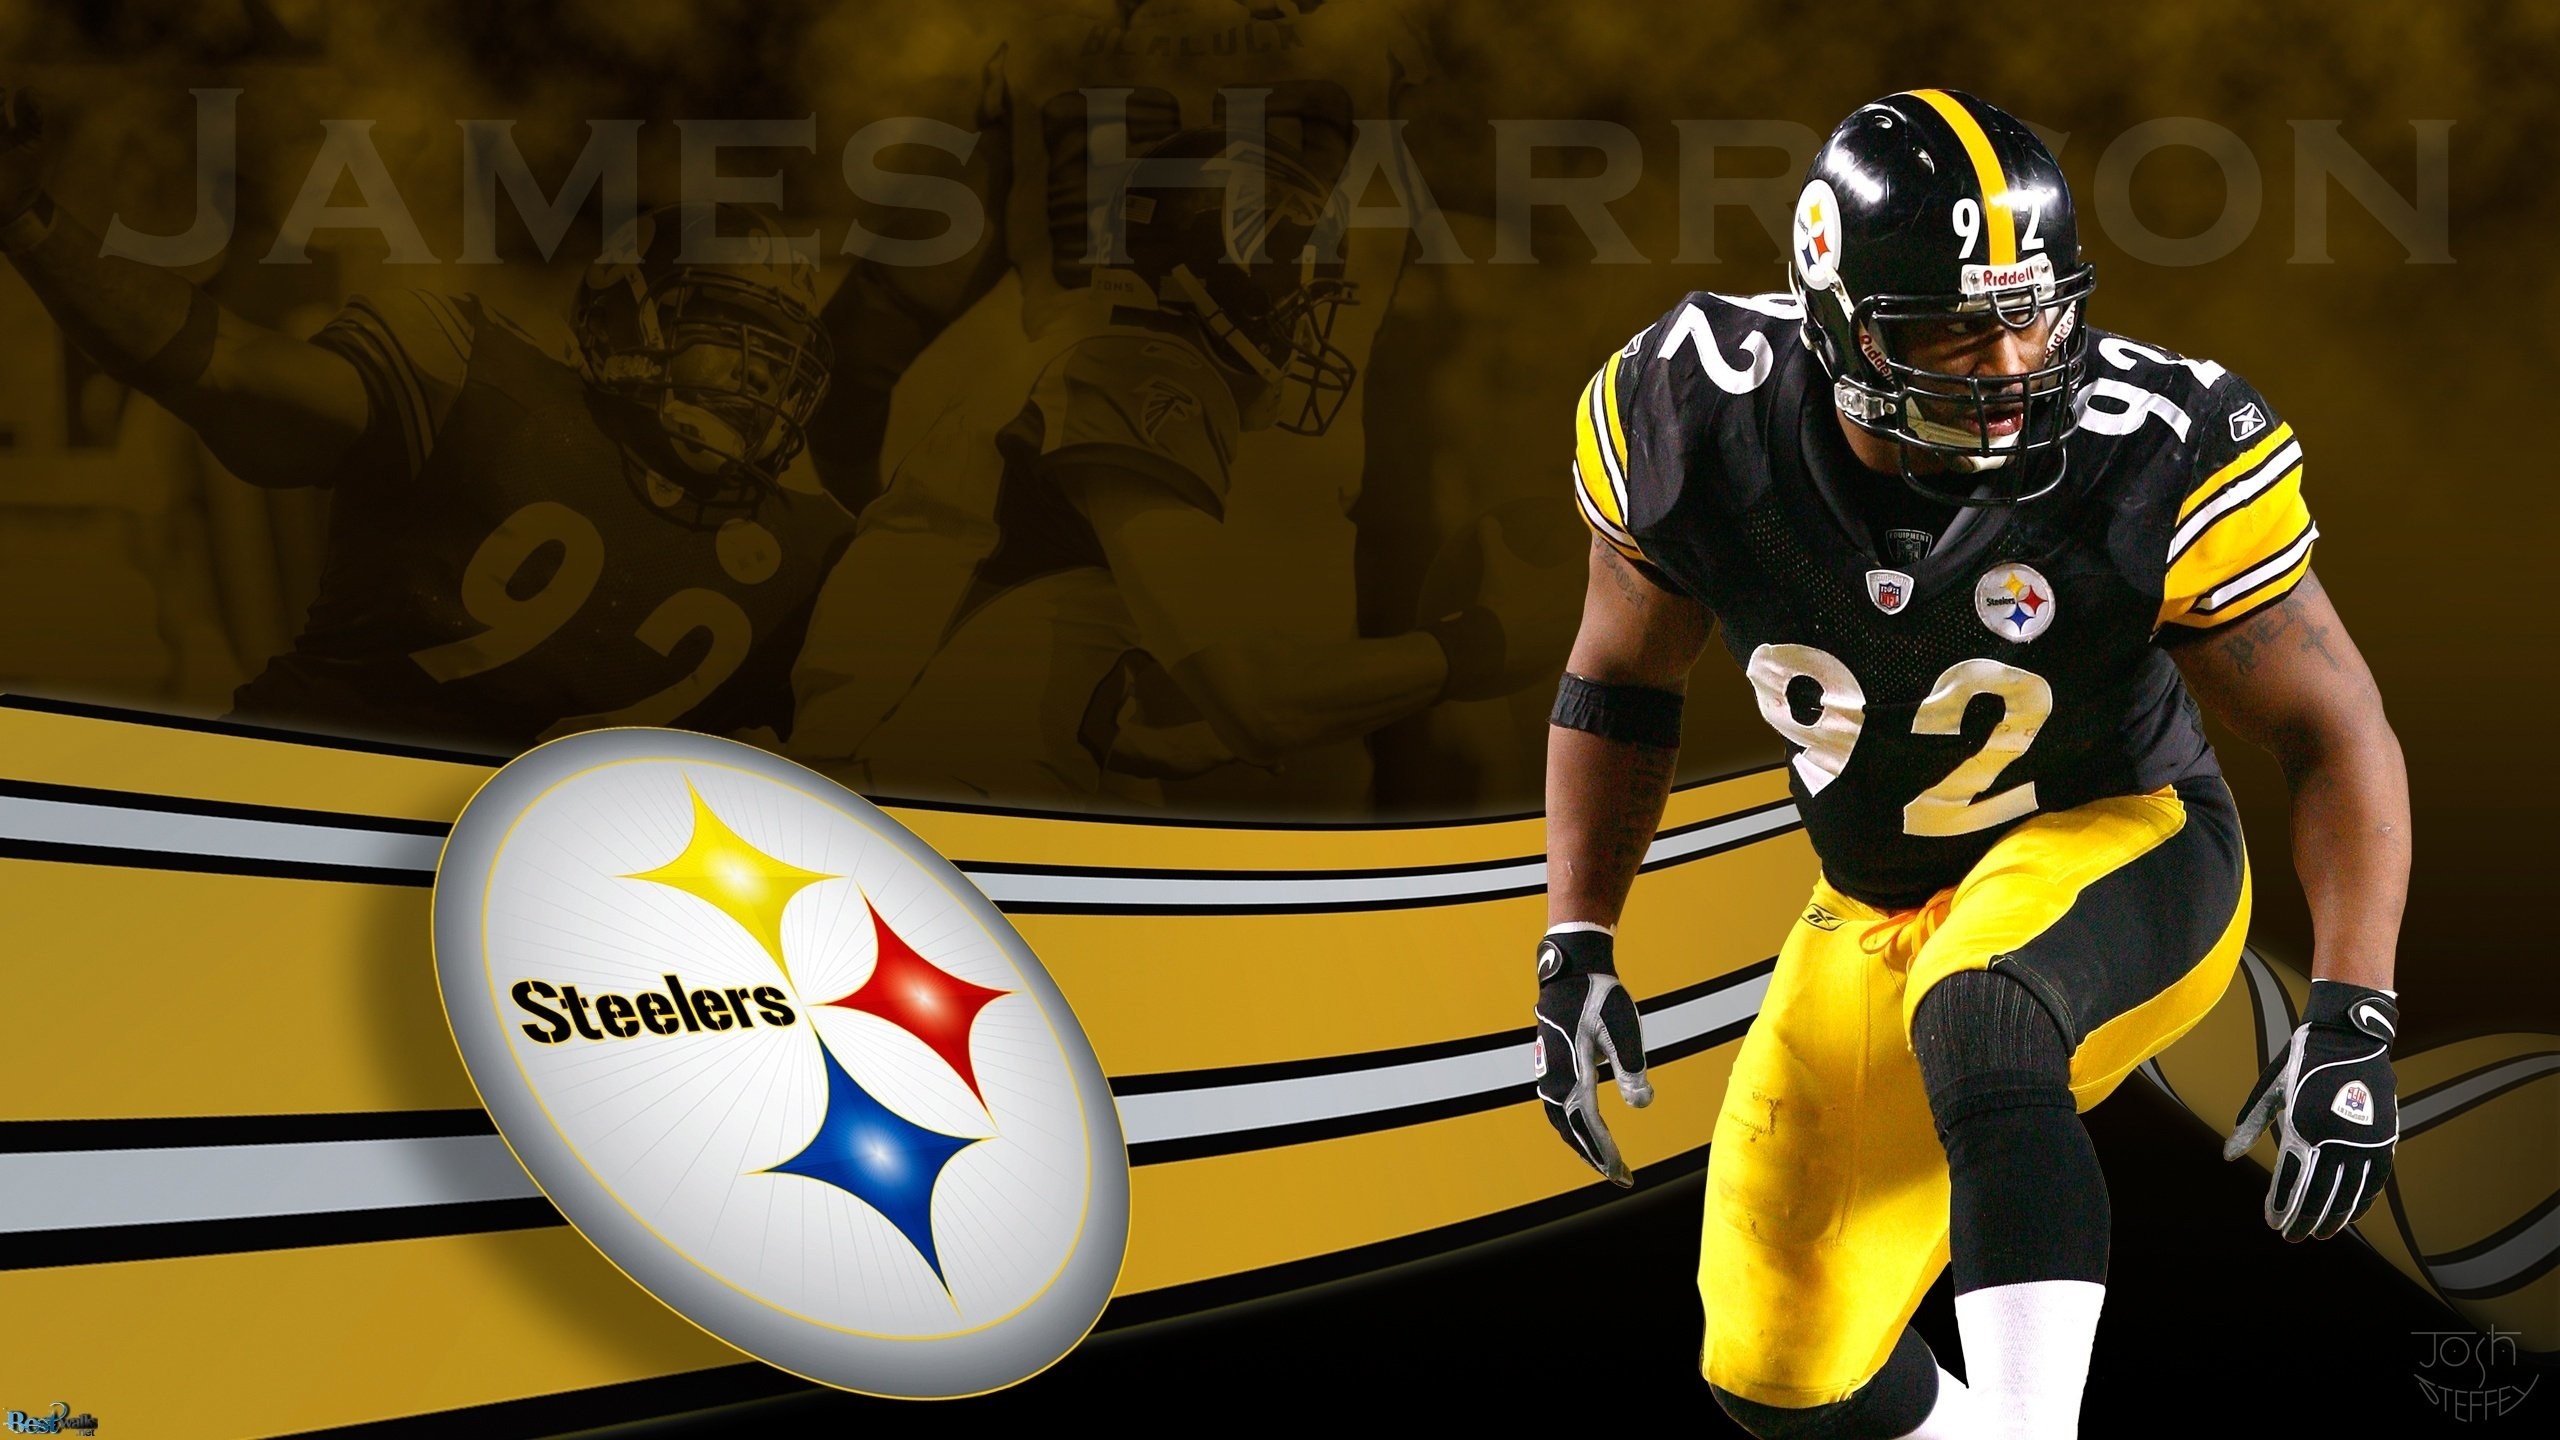 Steelers Live Wallpapers (59+ images)